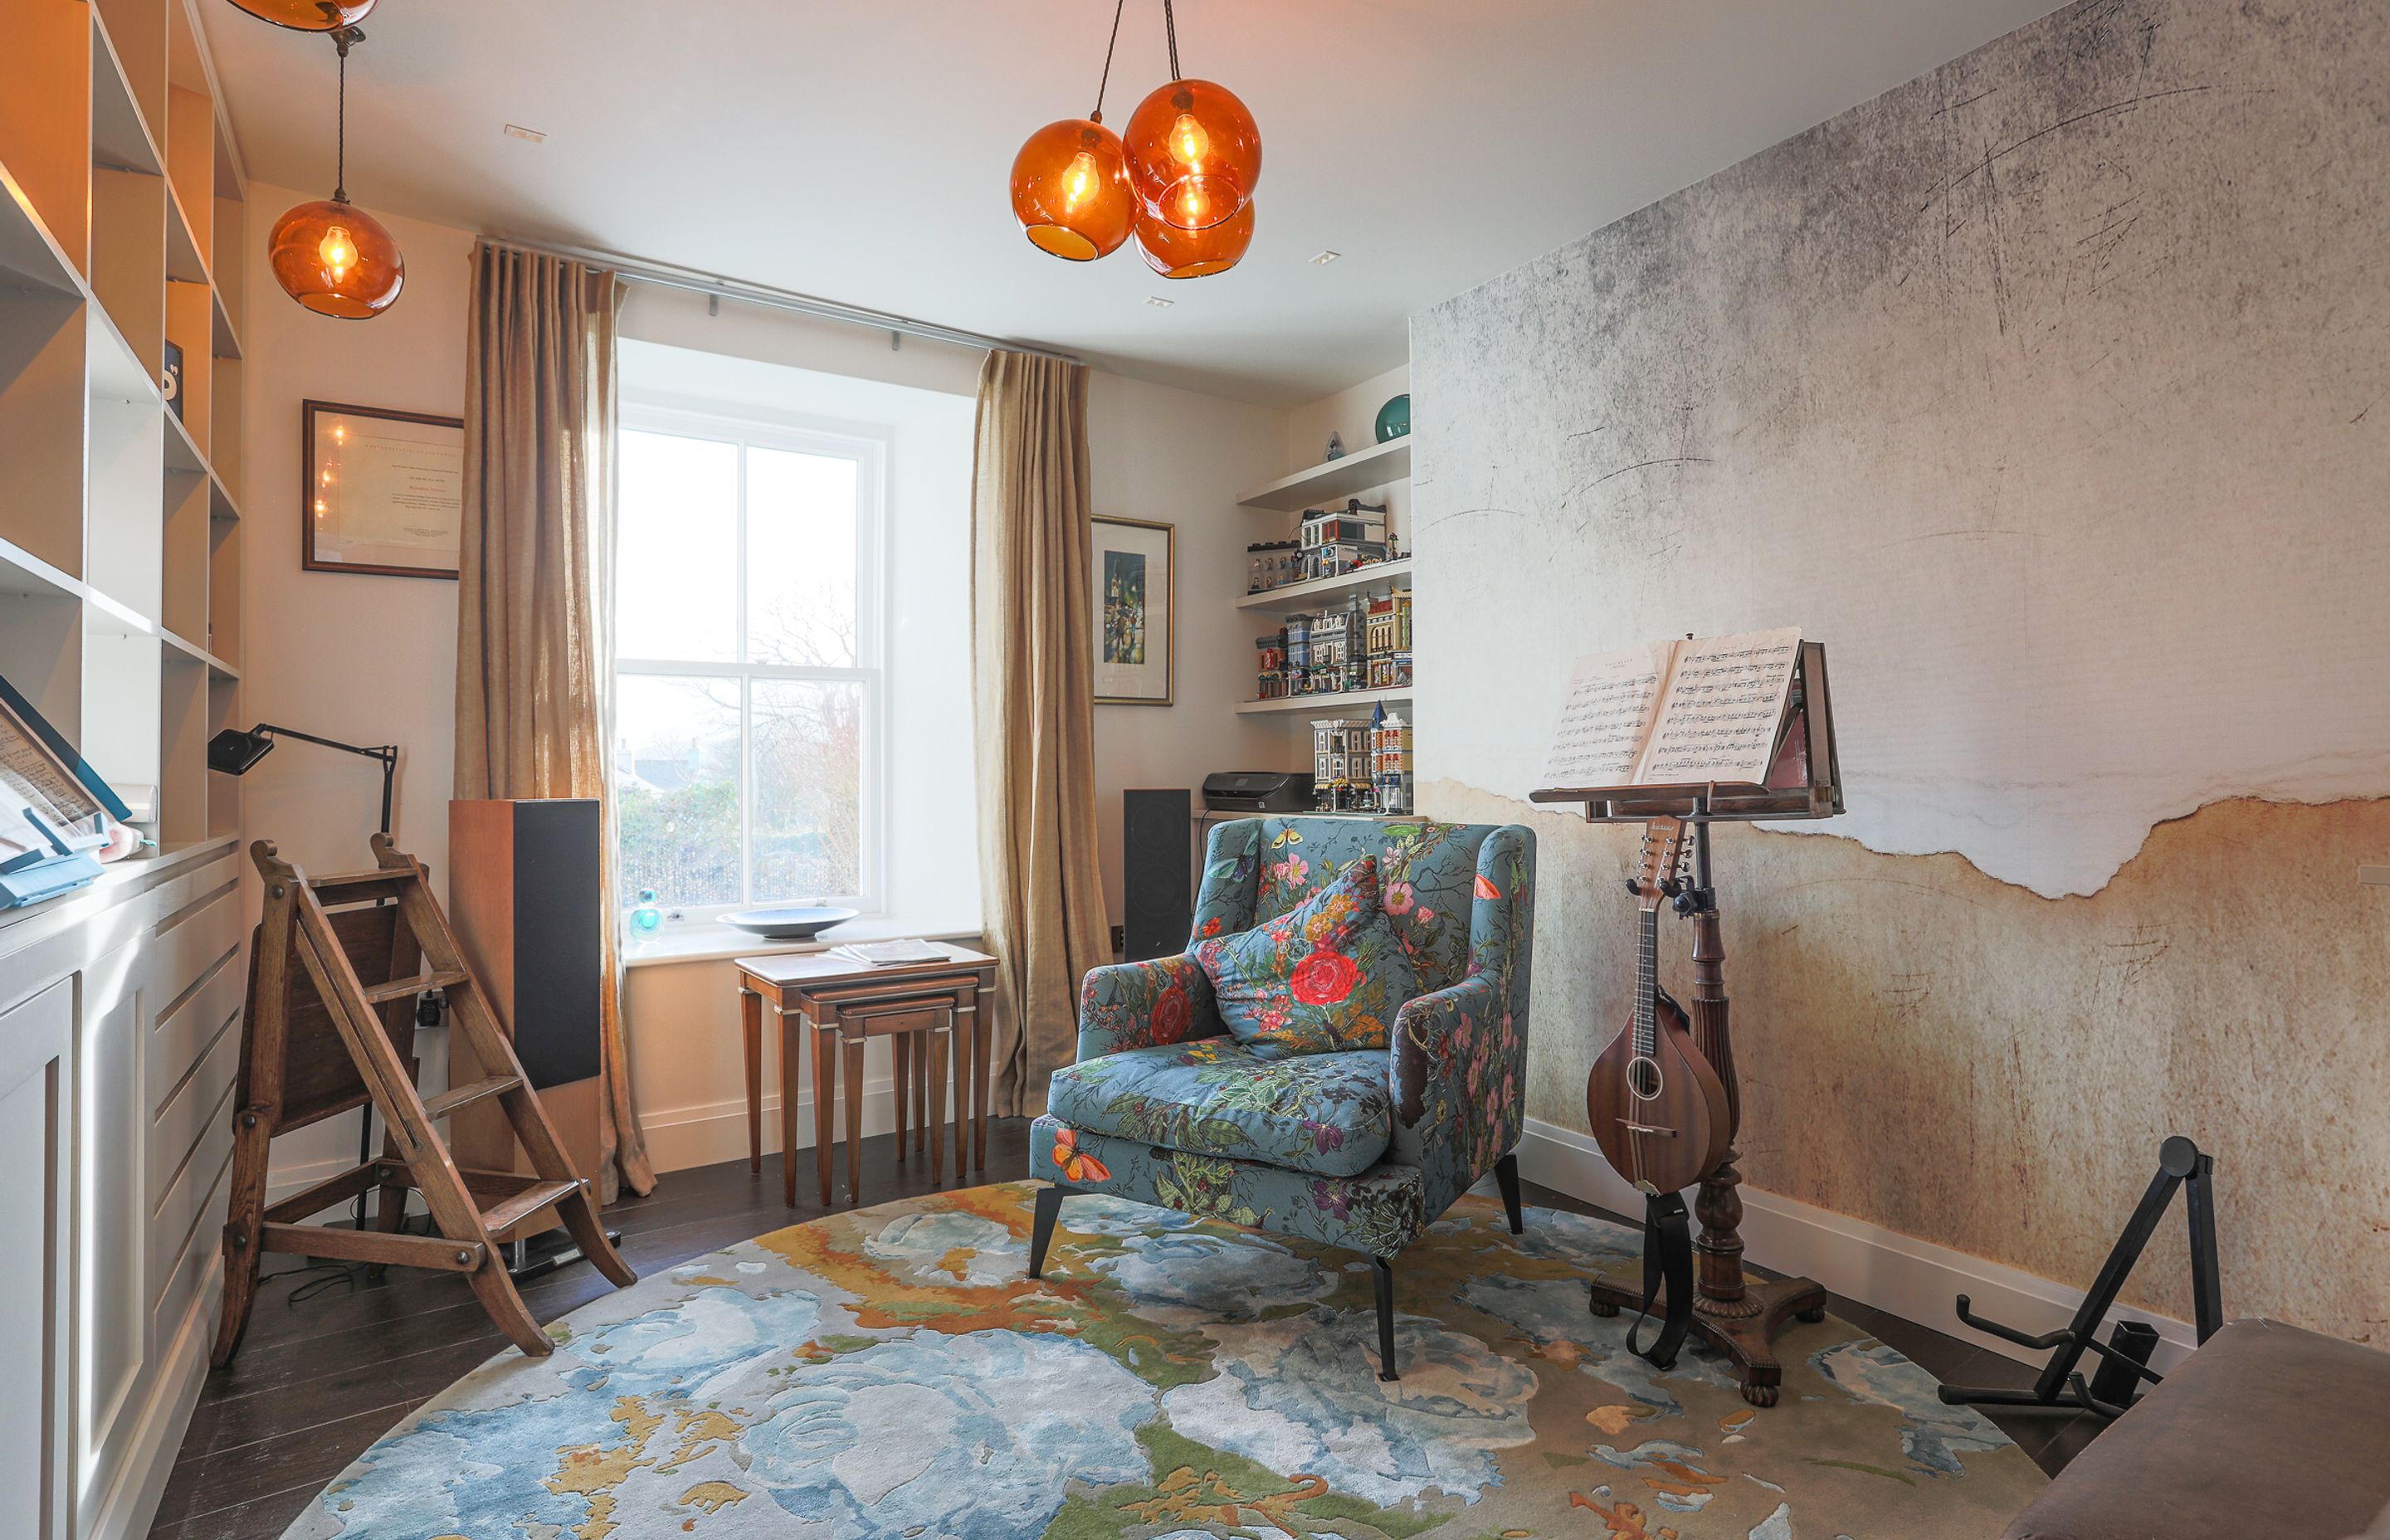 The music room pulled together pattern, colour and an eclectic twist of quirkiness.